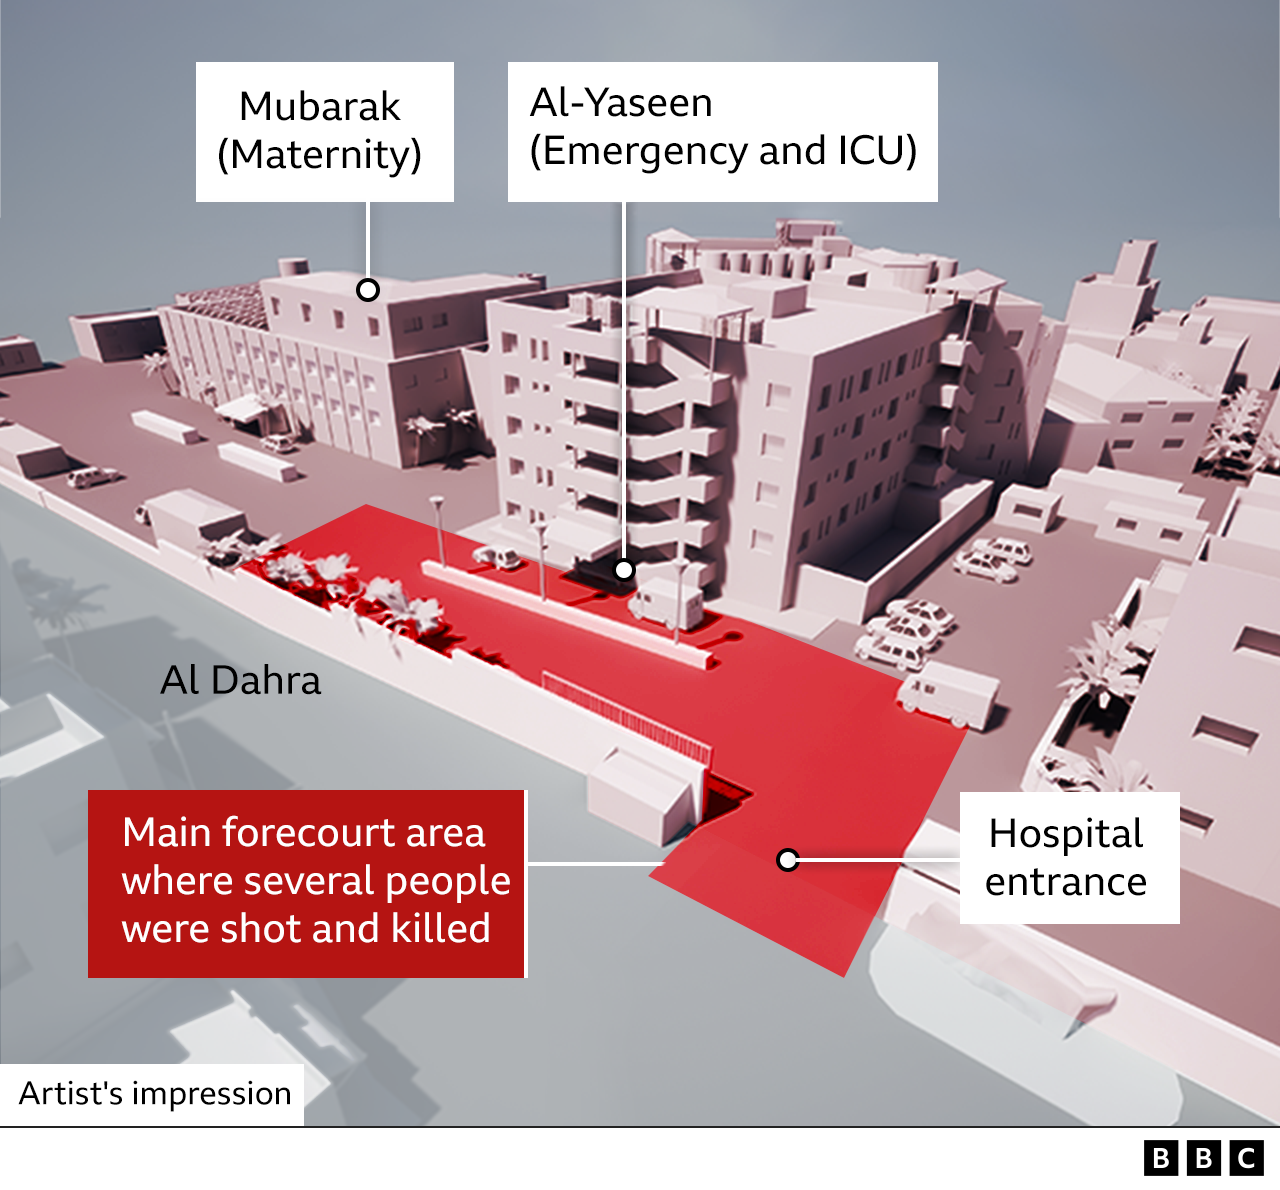 Model of Nasser hospital buildings and forecourt area where people shot at